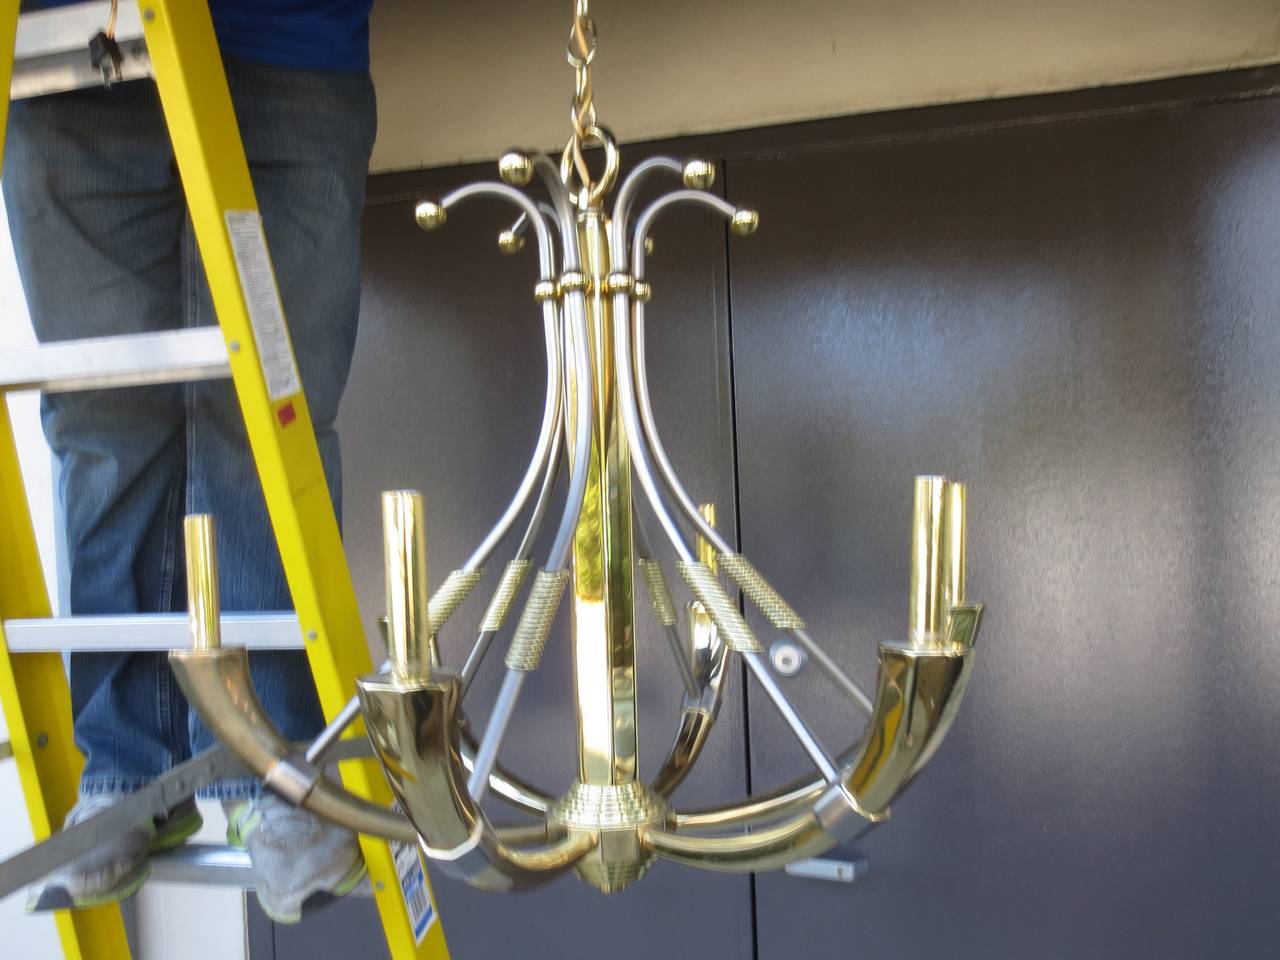 Pair of Mid-20th Century steel & brass chandeliers in the style of Jansen.
New wiring
Sold as a pair